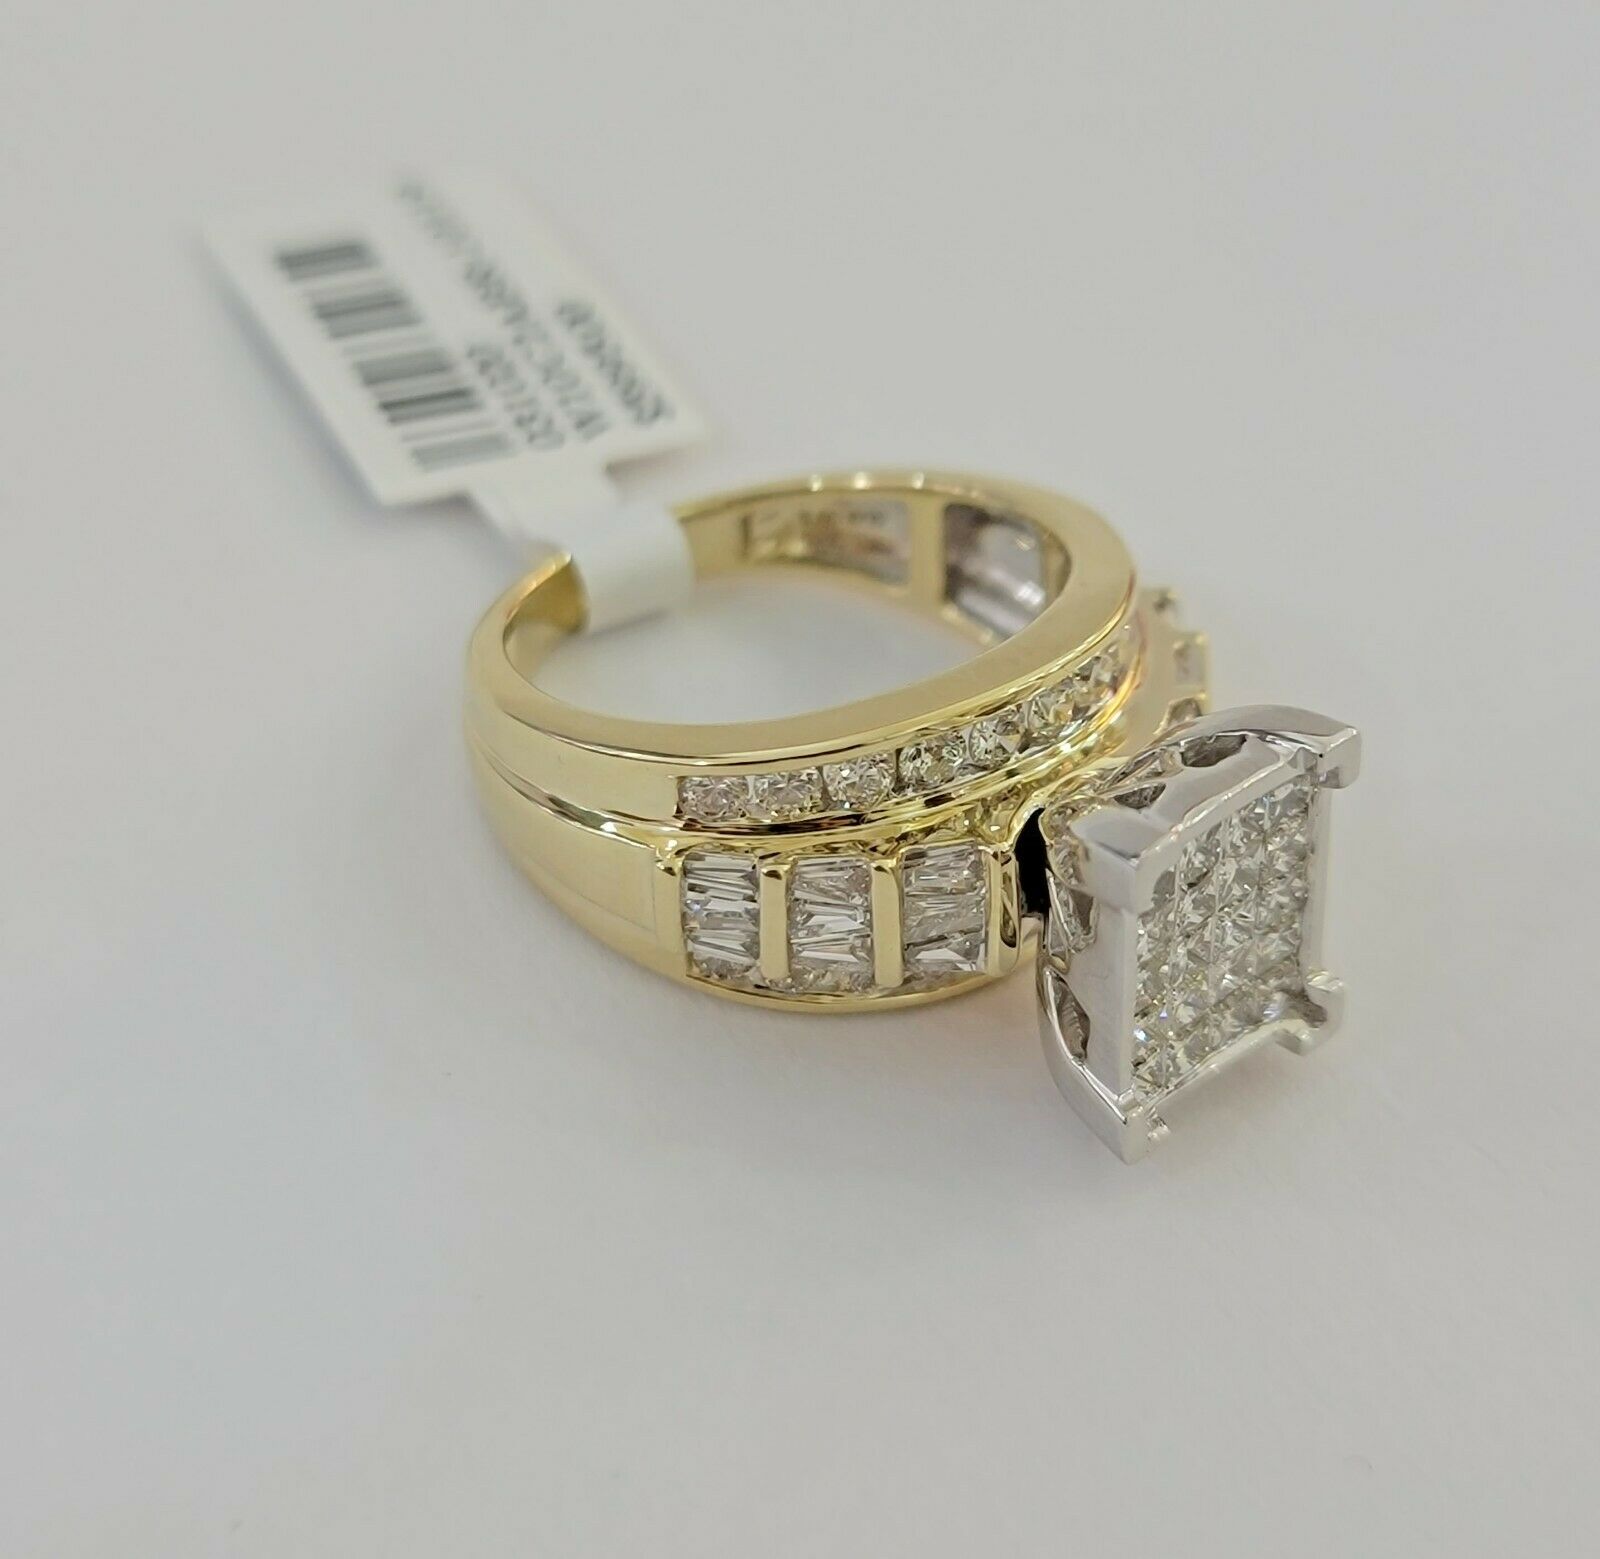 Real 14kt Gold Diamond Ladies Ring 2CT Princess Cut Baguette Round, Yellow Gold